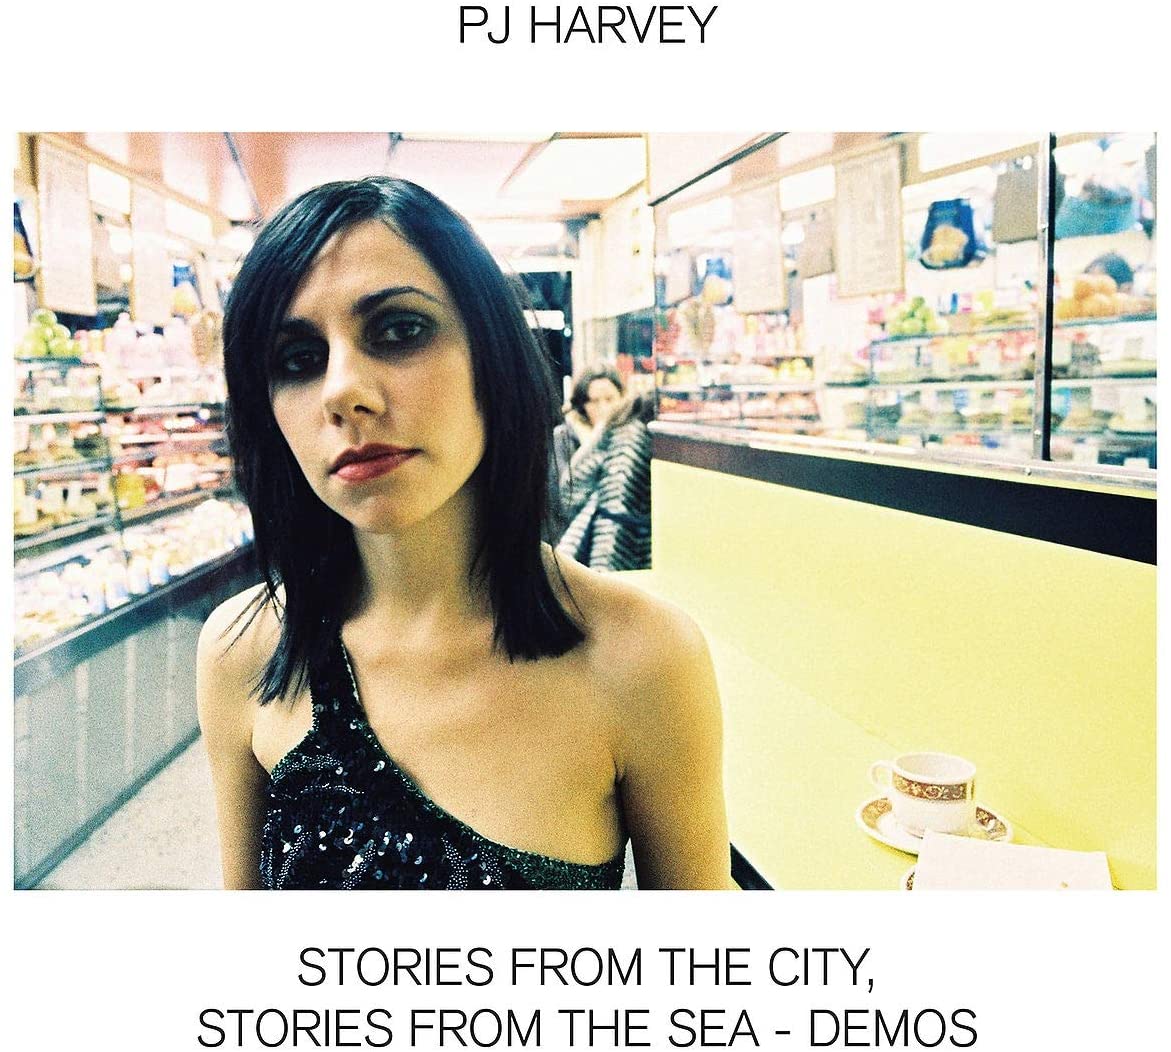 PJ Harvey - Stories From the City, Stories from the Sea Demos (Vinyl LP)